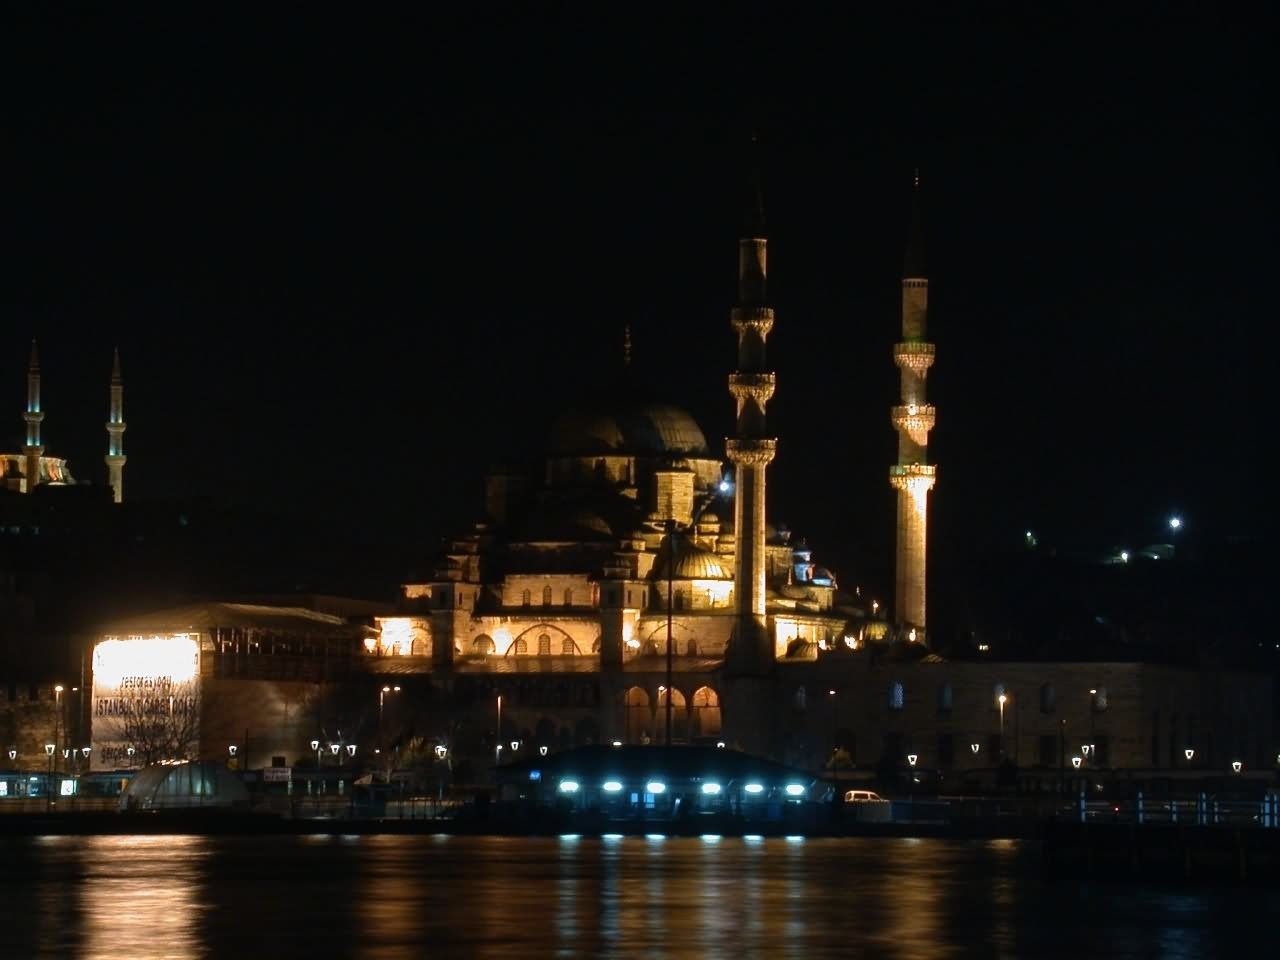 Night Picture Of The Yeni Cami In Istanbul